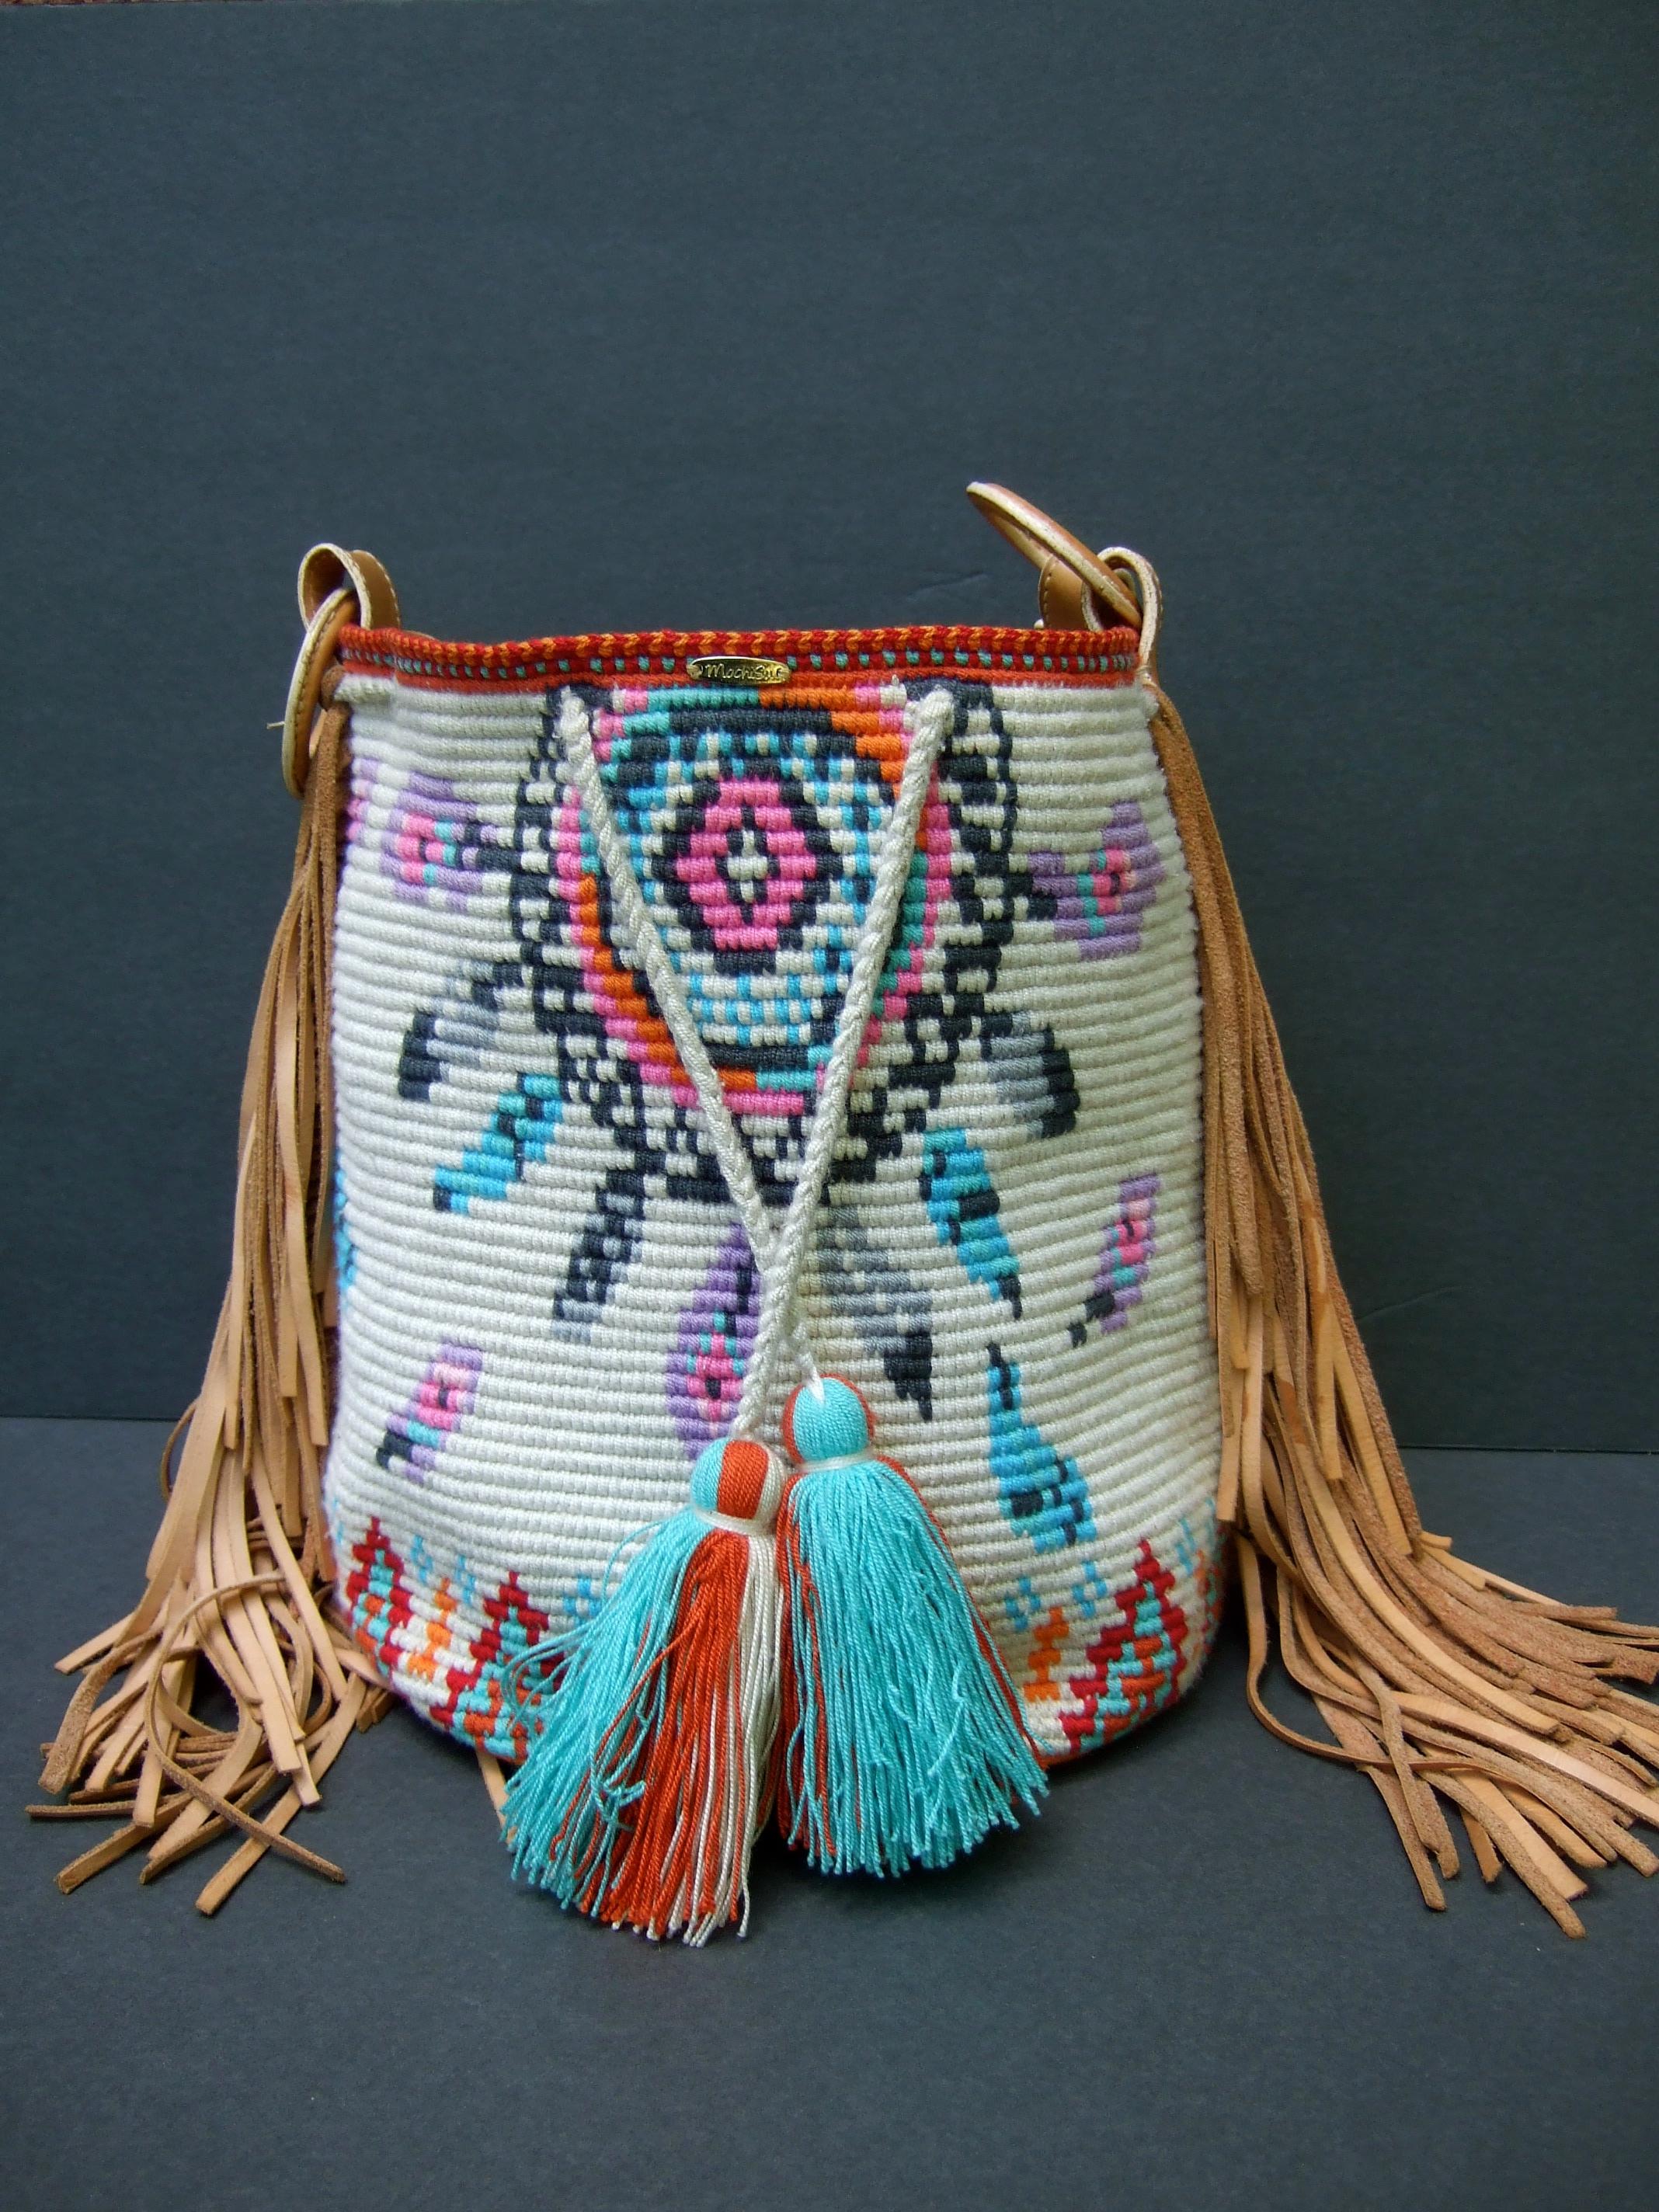 Handmade woven wool knit artisan bucket style shoulder bag c 1990s
The unique wool knit bucket style shoulder bag is designed 
with pastel south western style knit designs replicated on both
exterior sides

The bucket style knit shoulder bag is